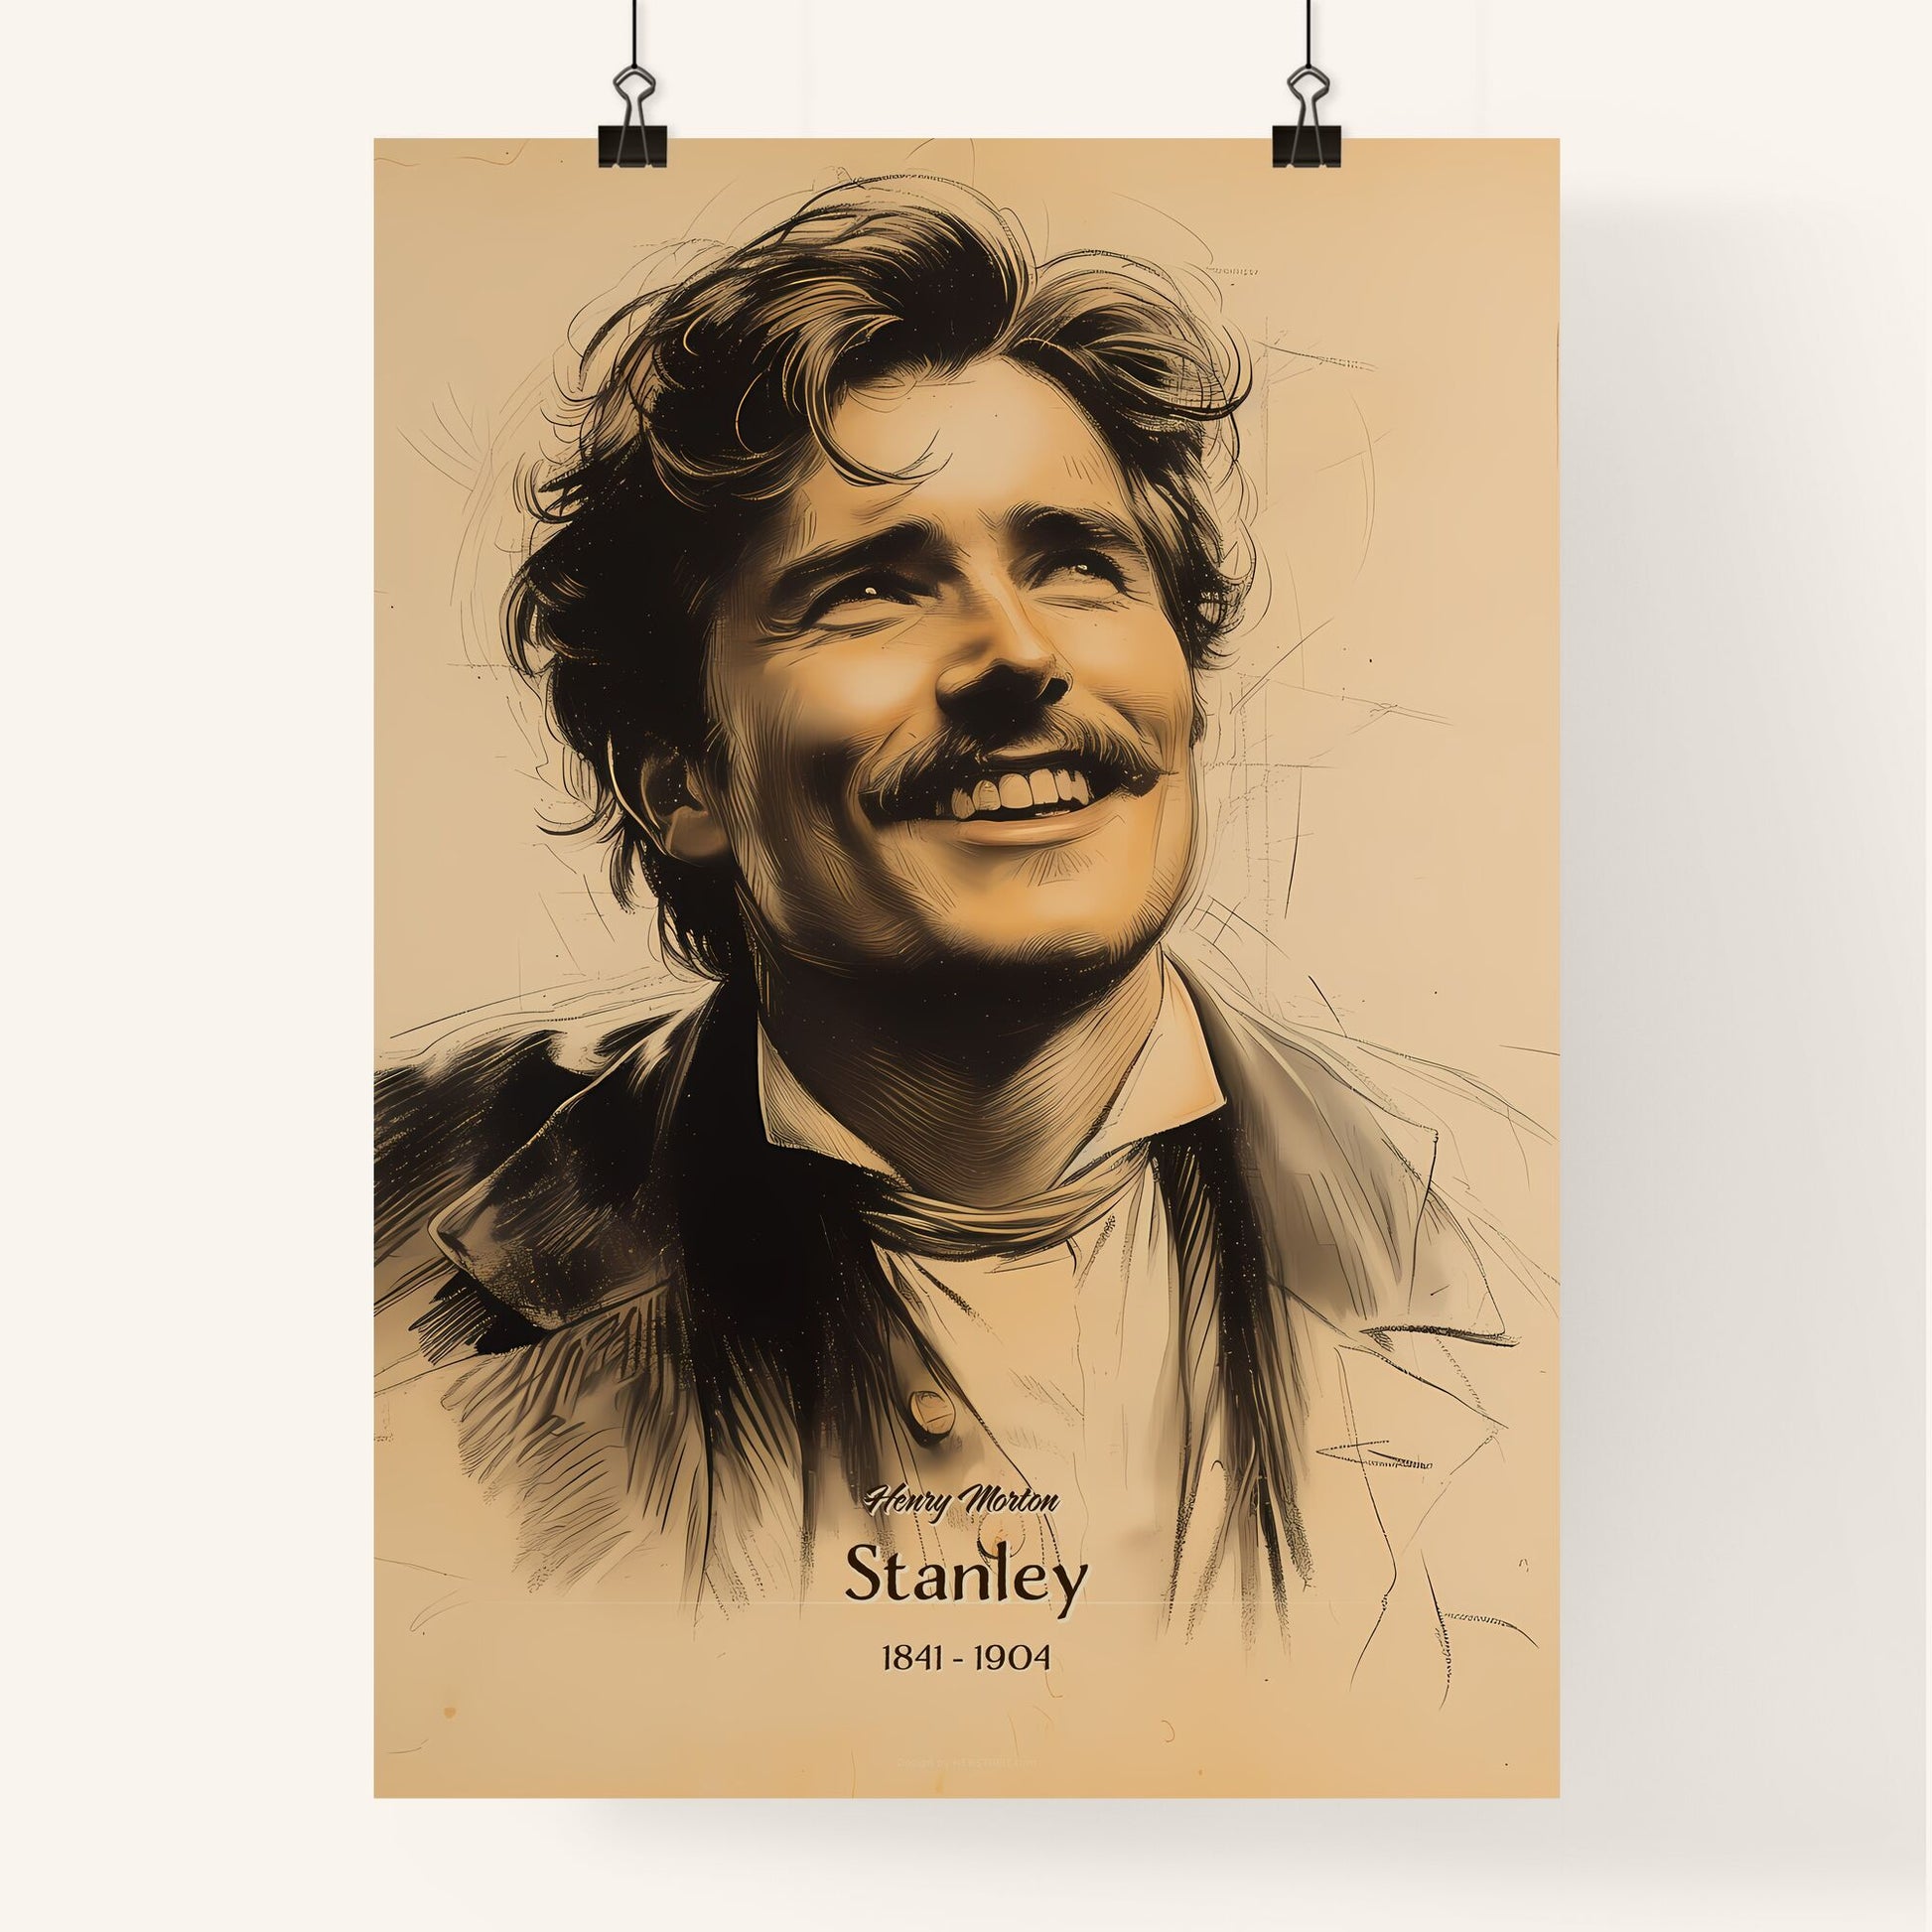 Henry Morton, Stanley, 1841 - 1904, A Poster of a man with a mustache smiling Default Title